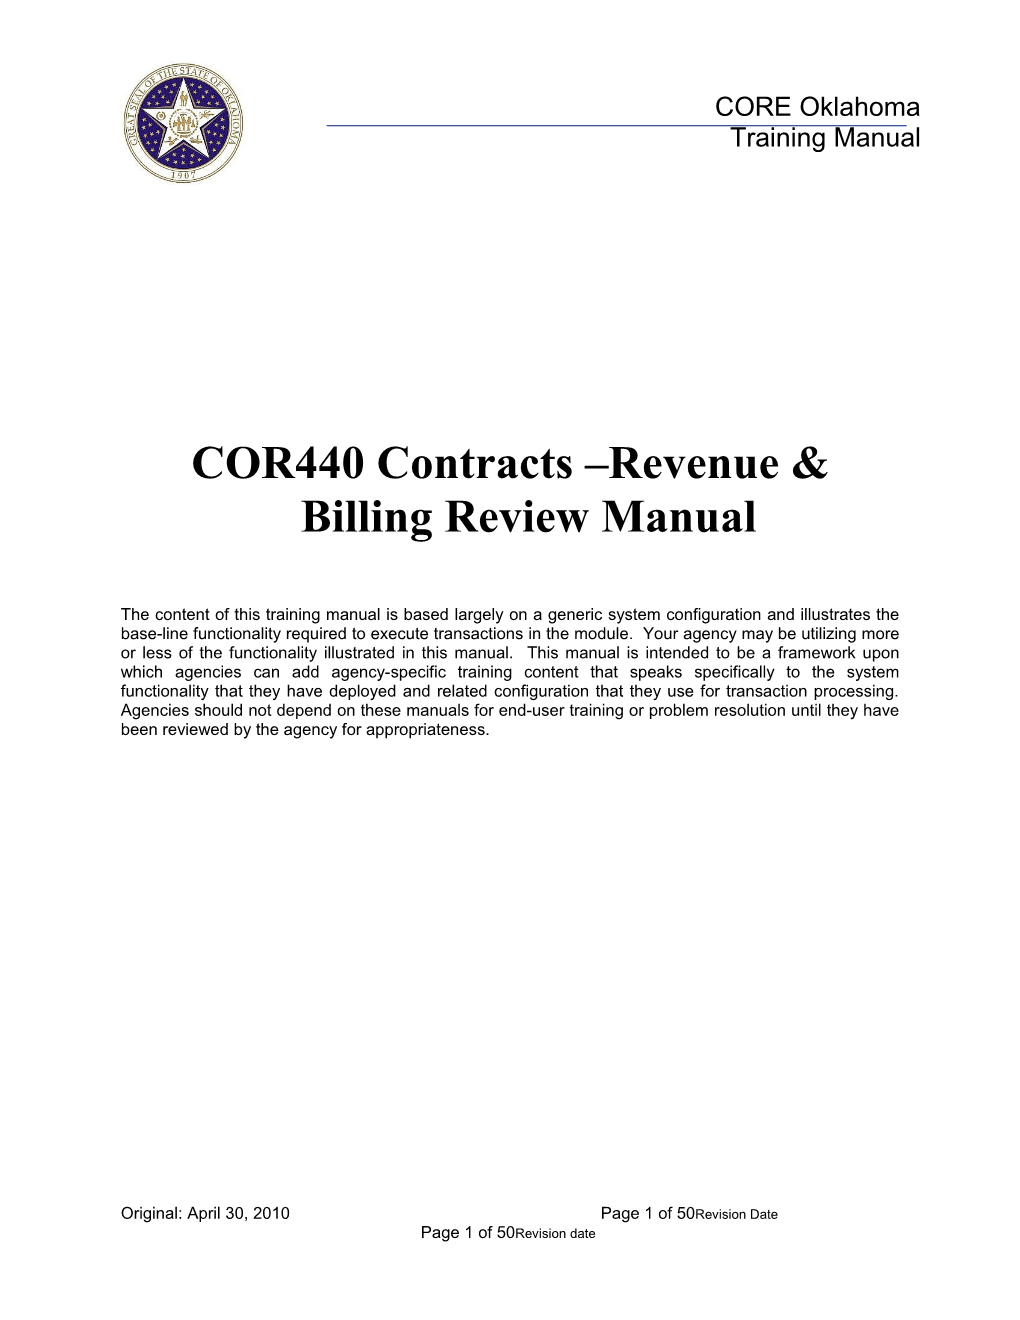 COR 440 Contracts Revenue and Billing Review Manual